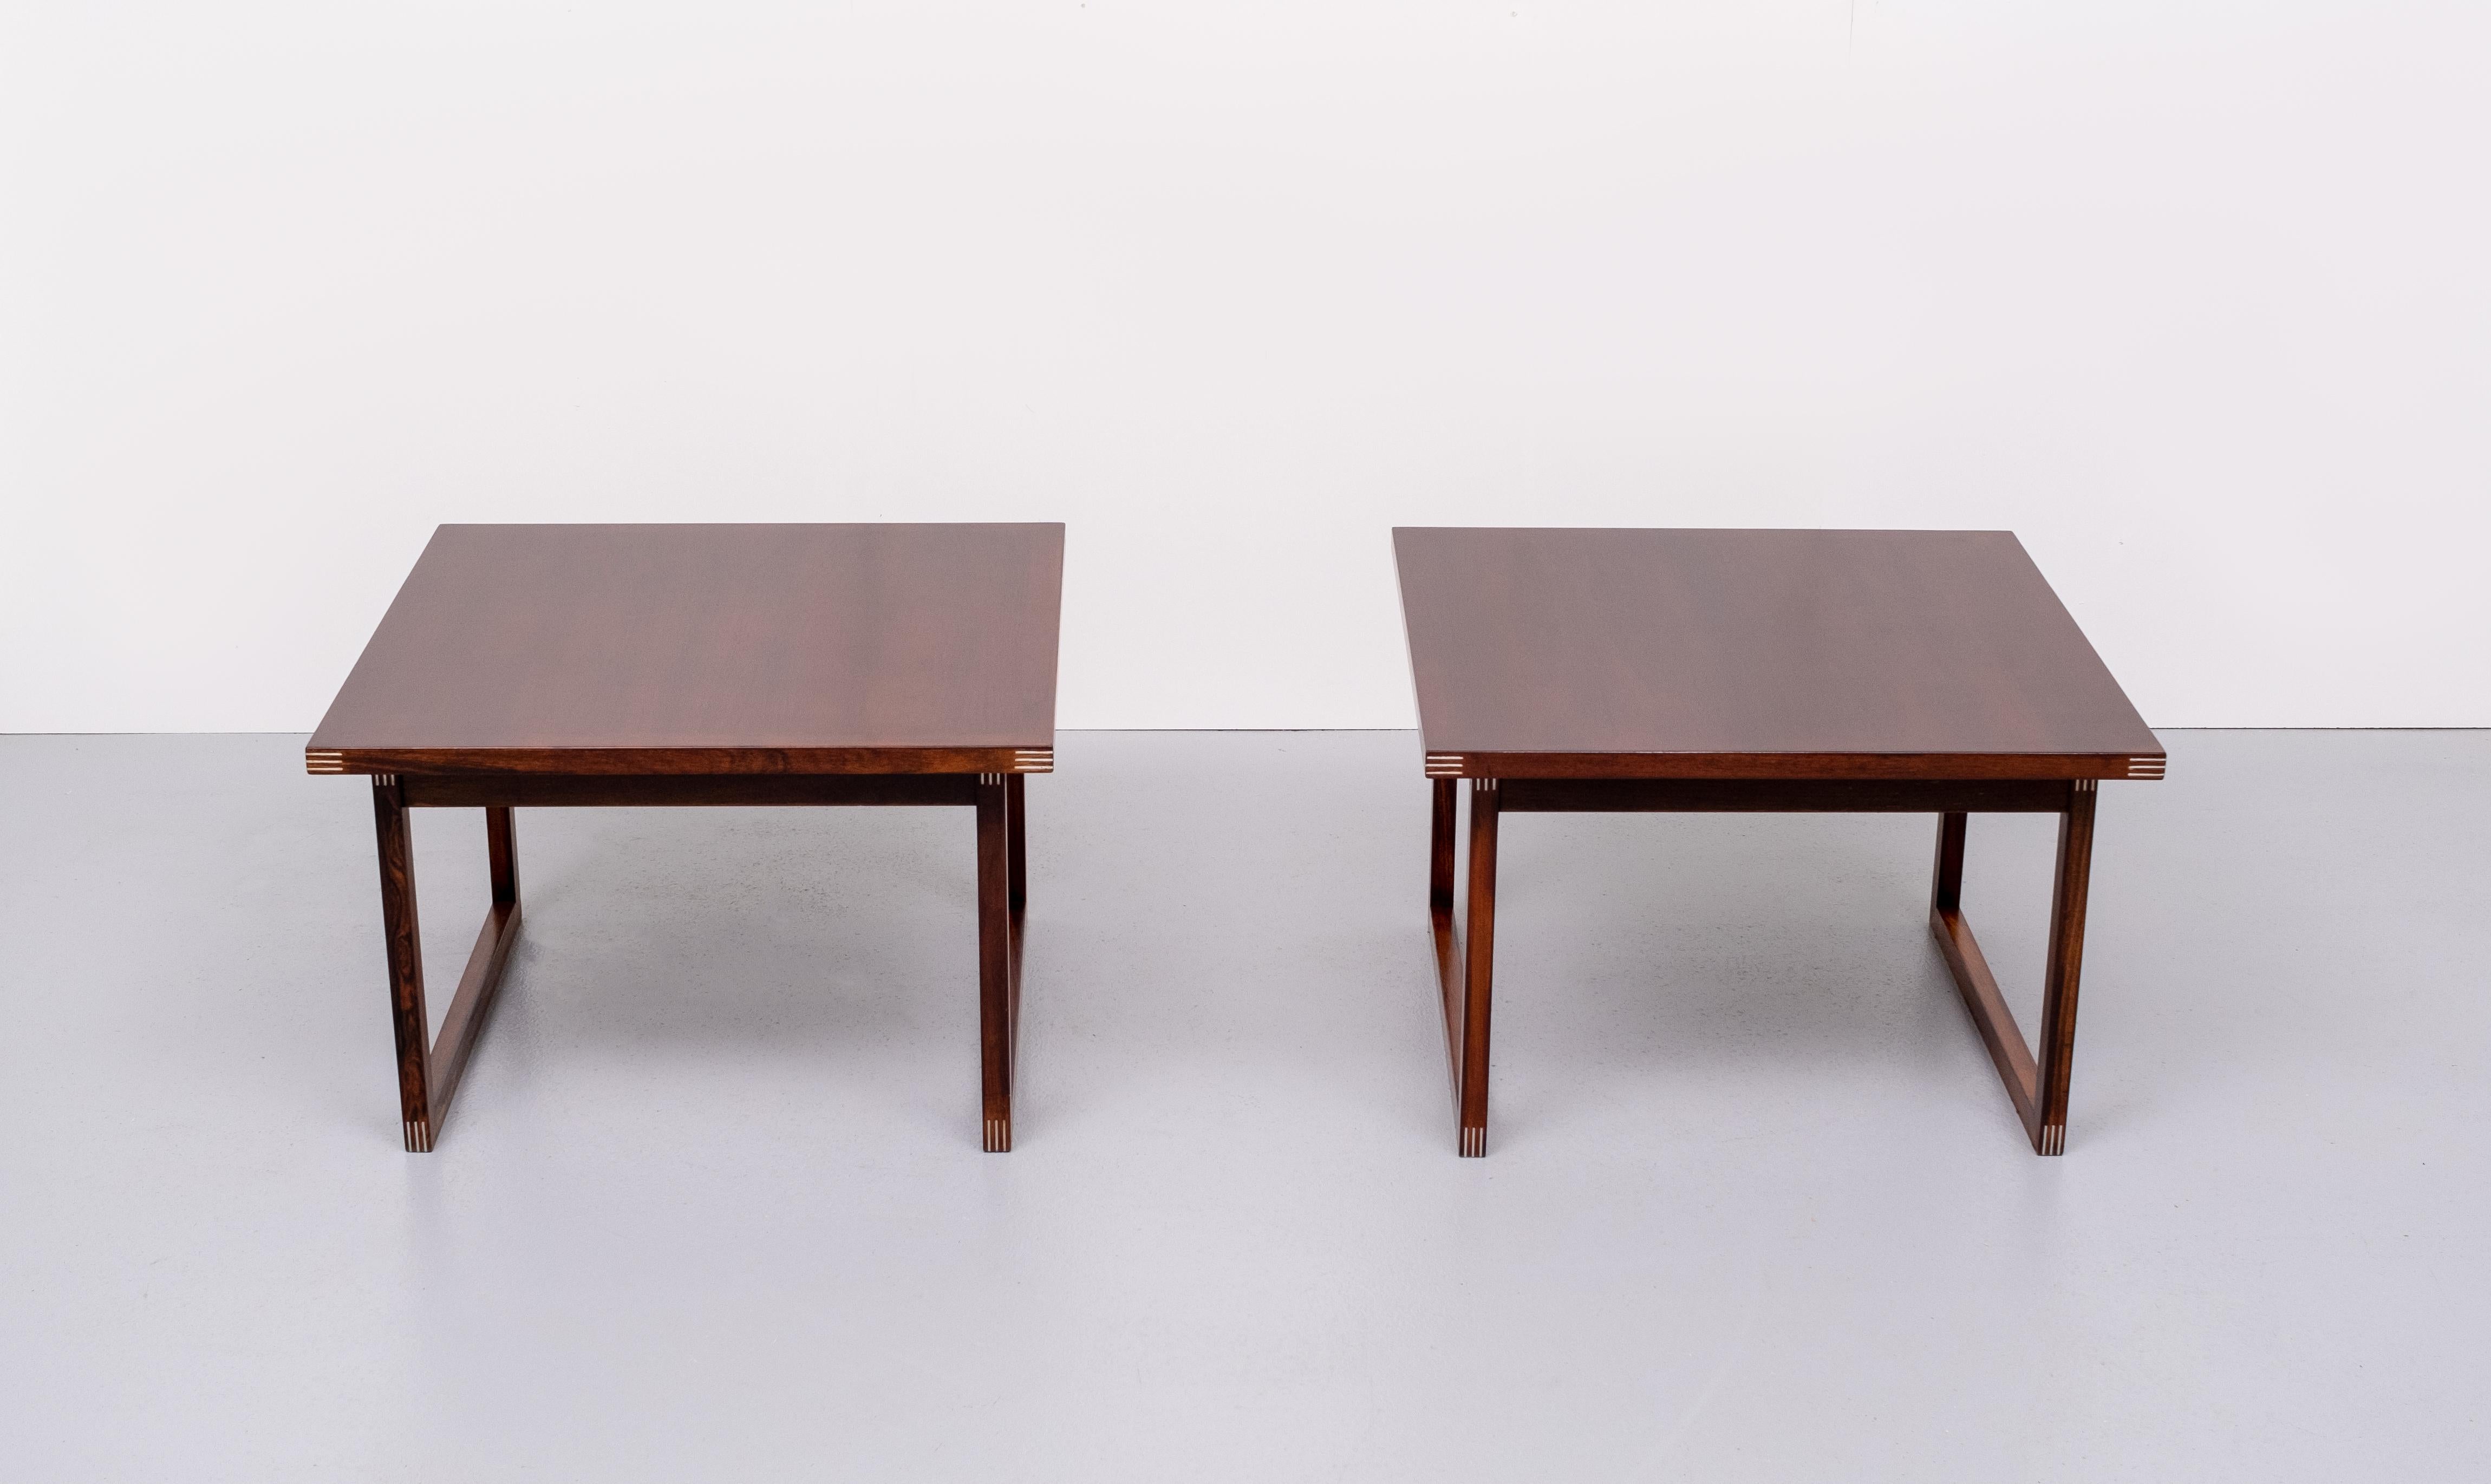 Very nice set of sofa tables Denmark, circa 1960. Superb construction with precision exposed contrasting aluminium joints. A beautiful Danish Mid-Century Modern piece.


